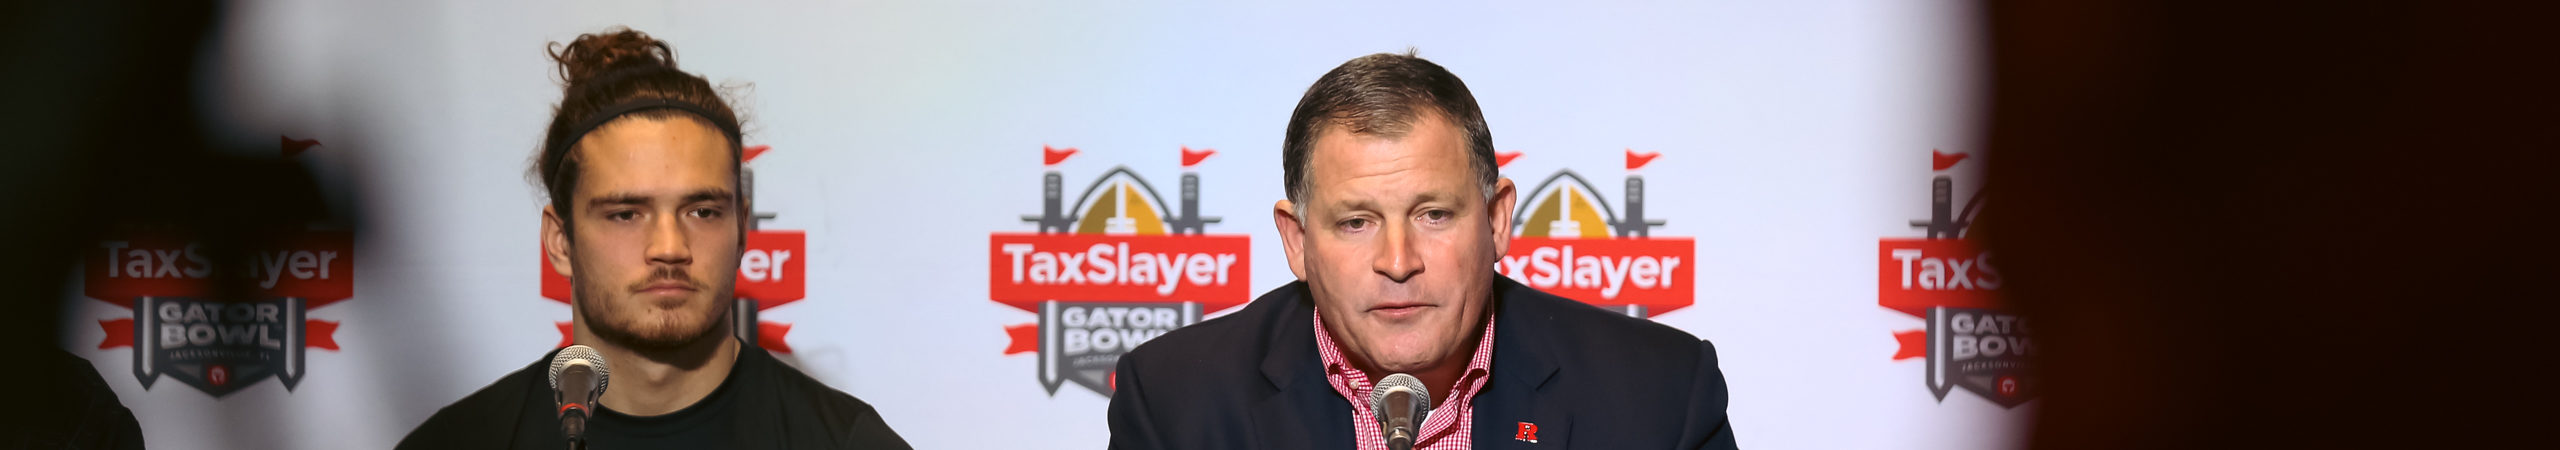 TaxSlayer GatorBowl Press Conference – Wake Forest vs Rutgers